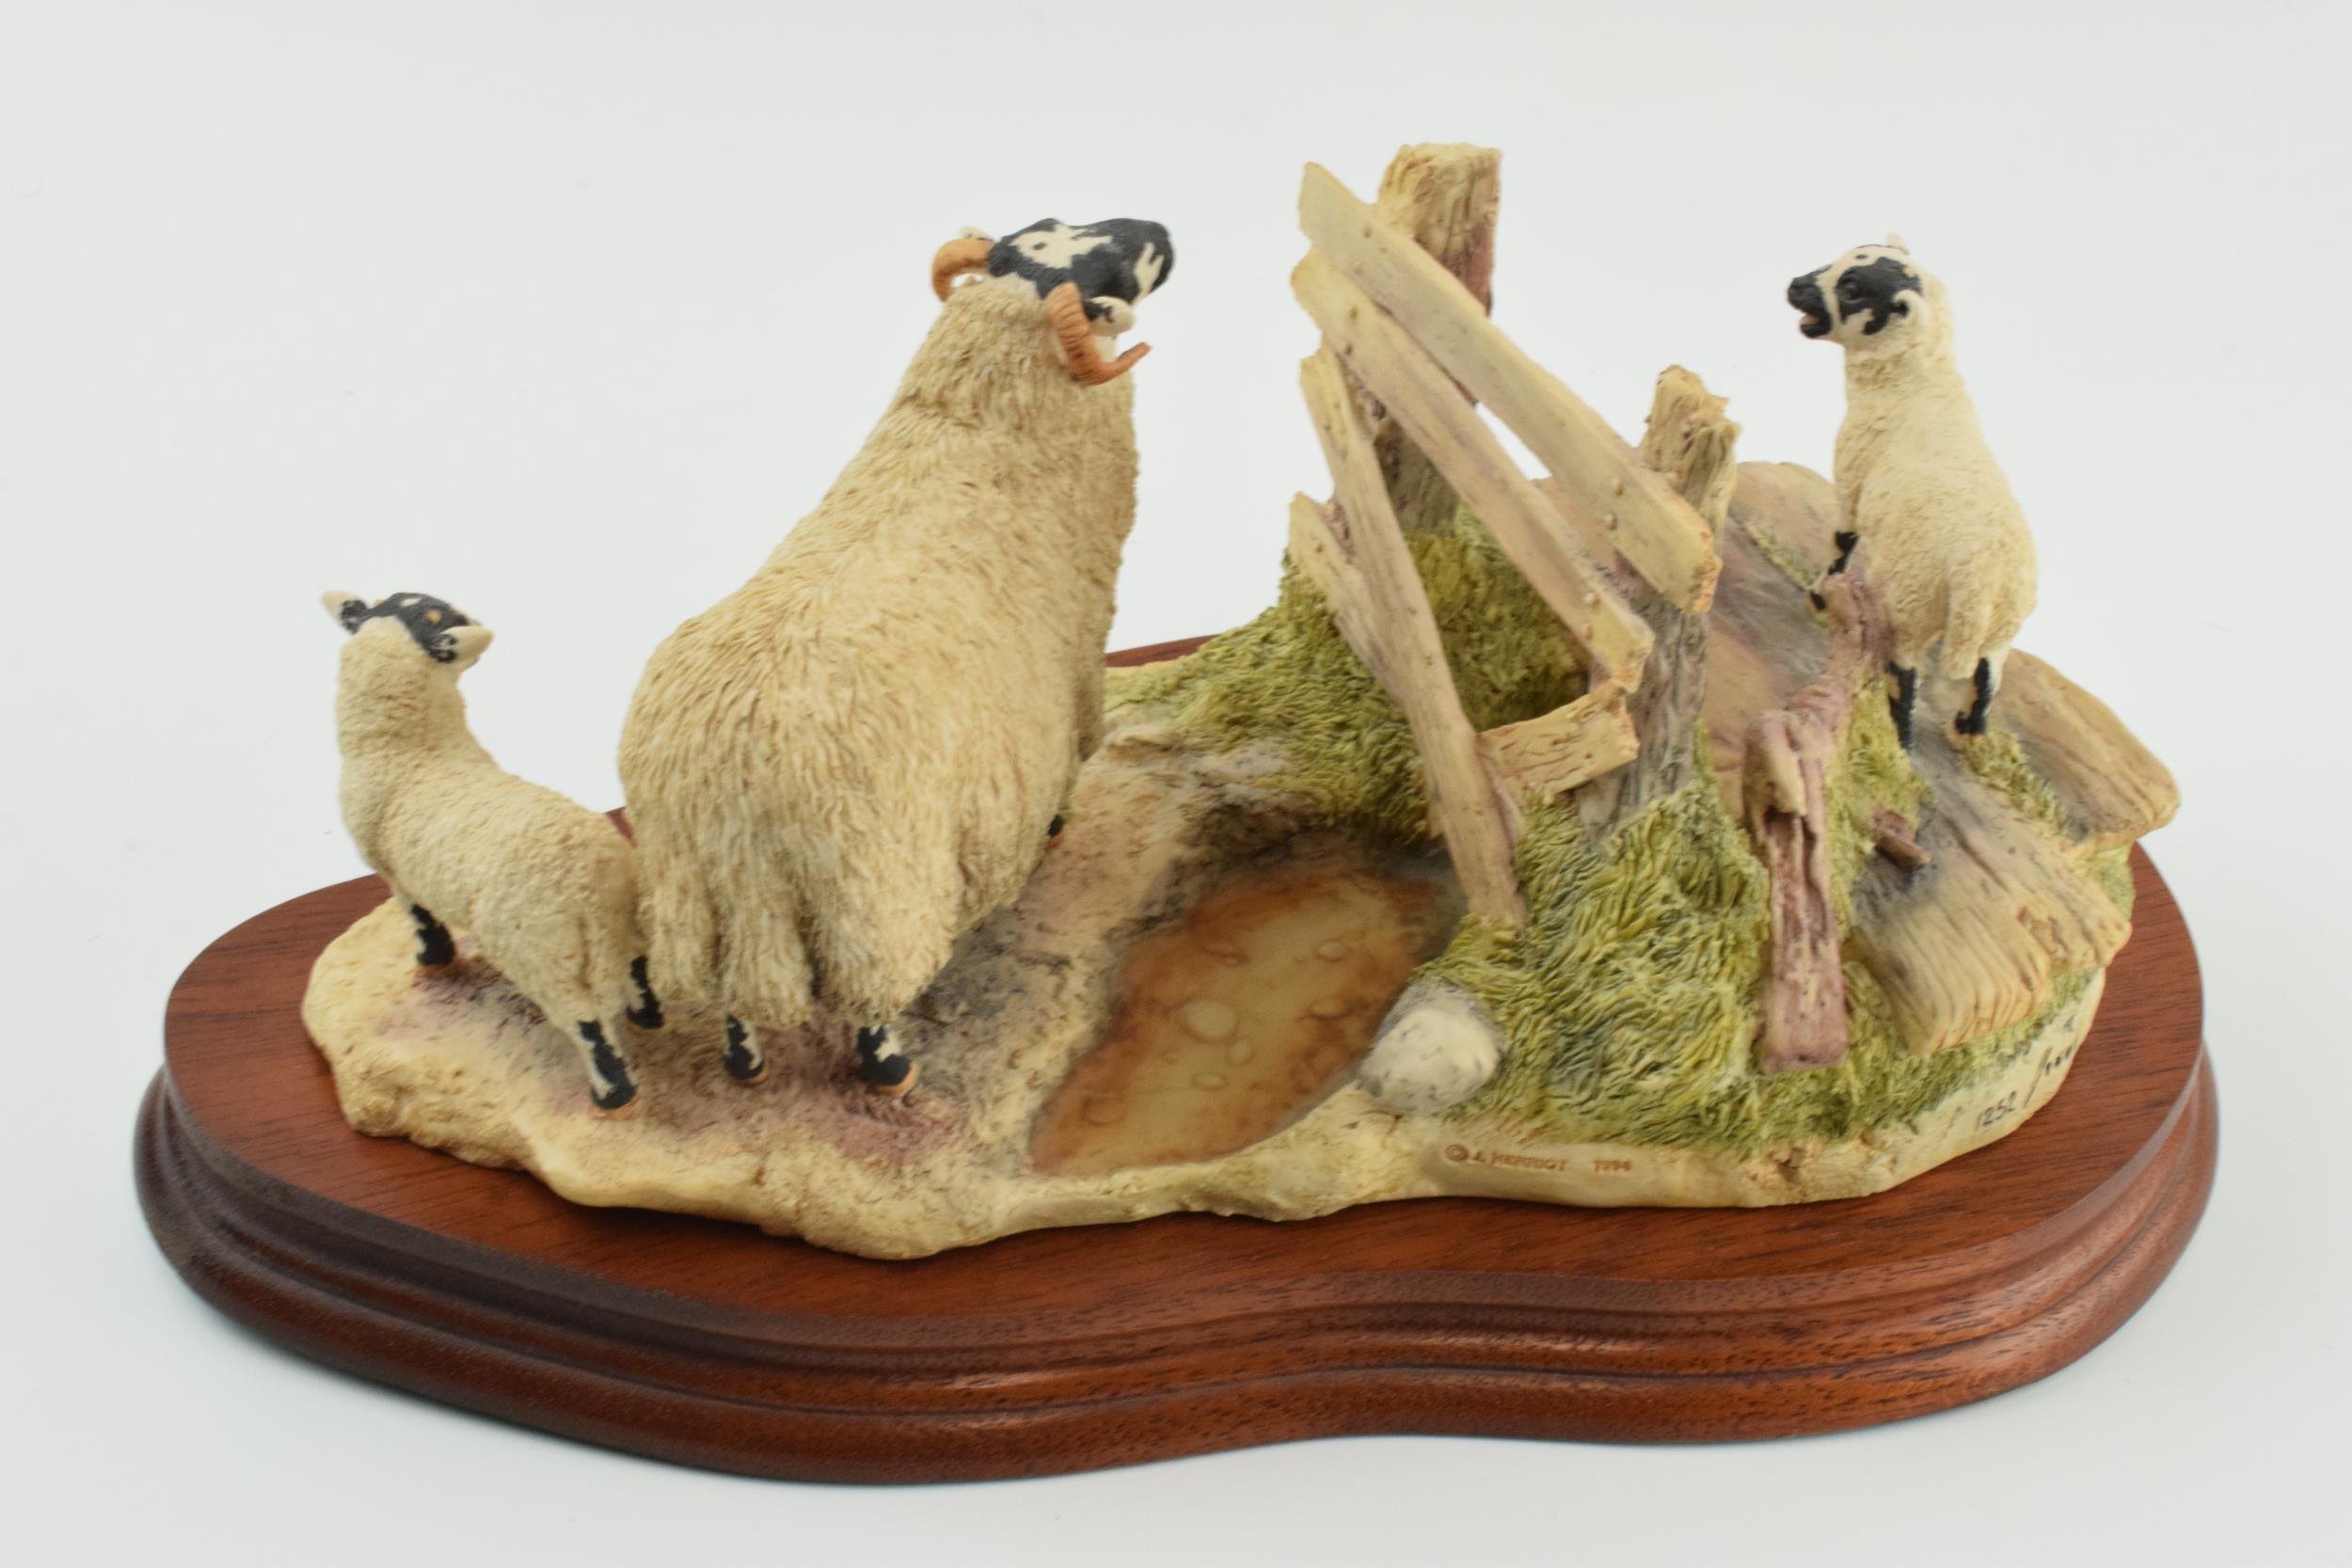 Border Fine Arts 'Wrong Side of the Fence' (Ewe and lambs), by Anne Wall, limited edition 1252/1500, - Image 4 of 5